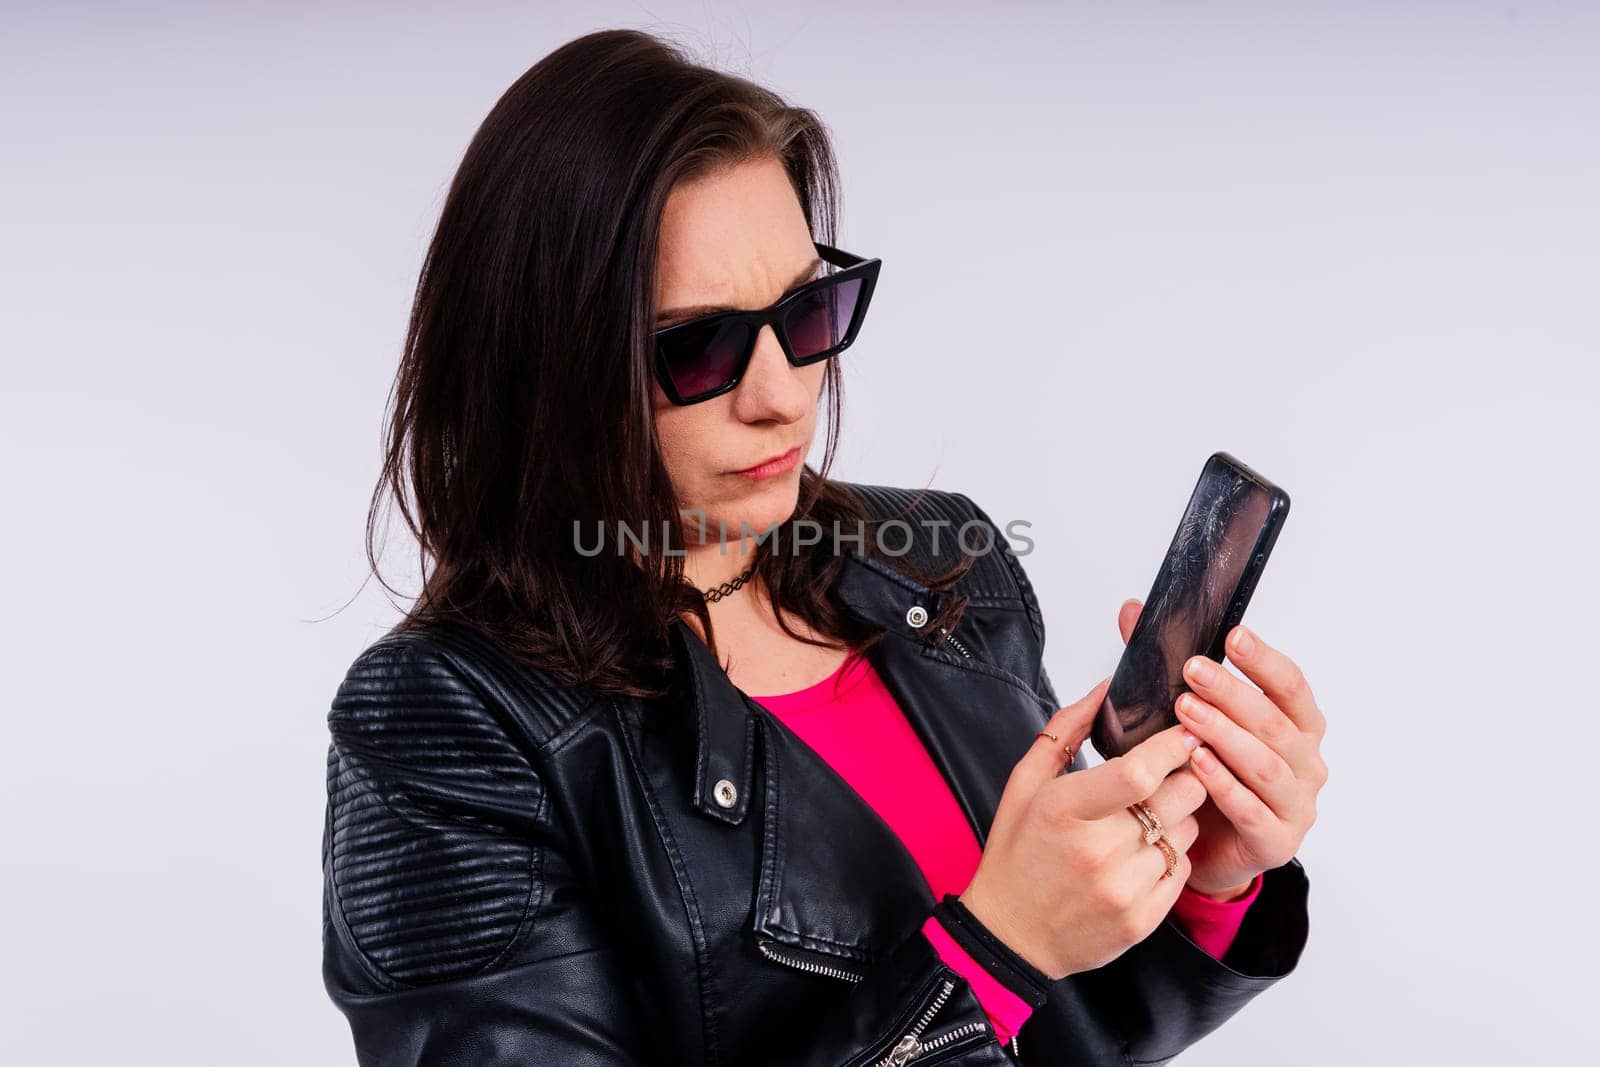 A frustrated young woman with broken phone in her hands. White isolated background. Broken Gadget